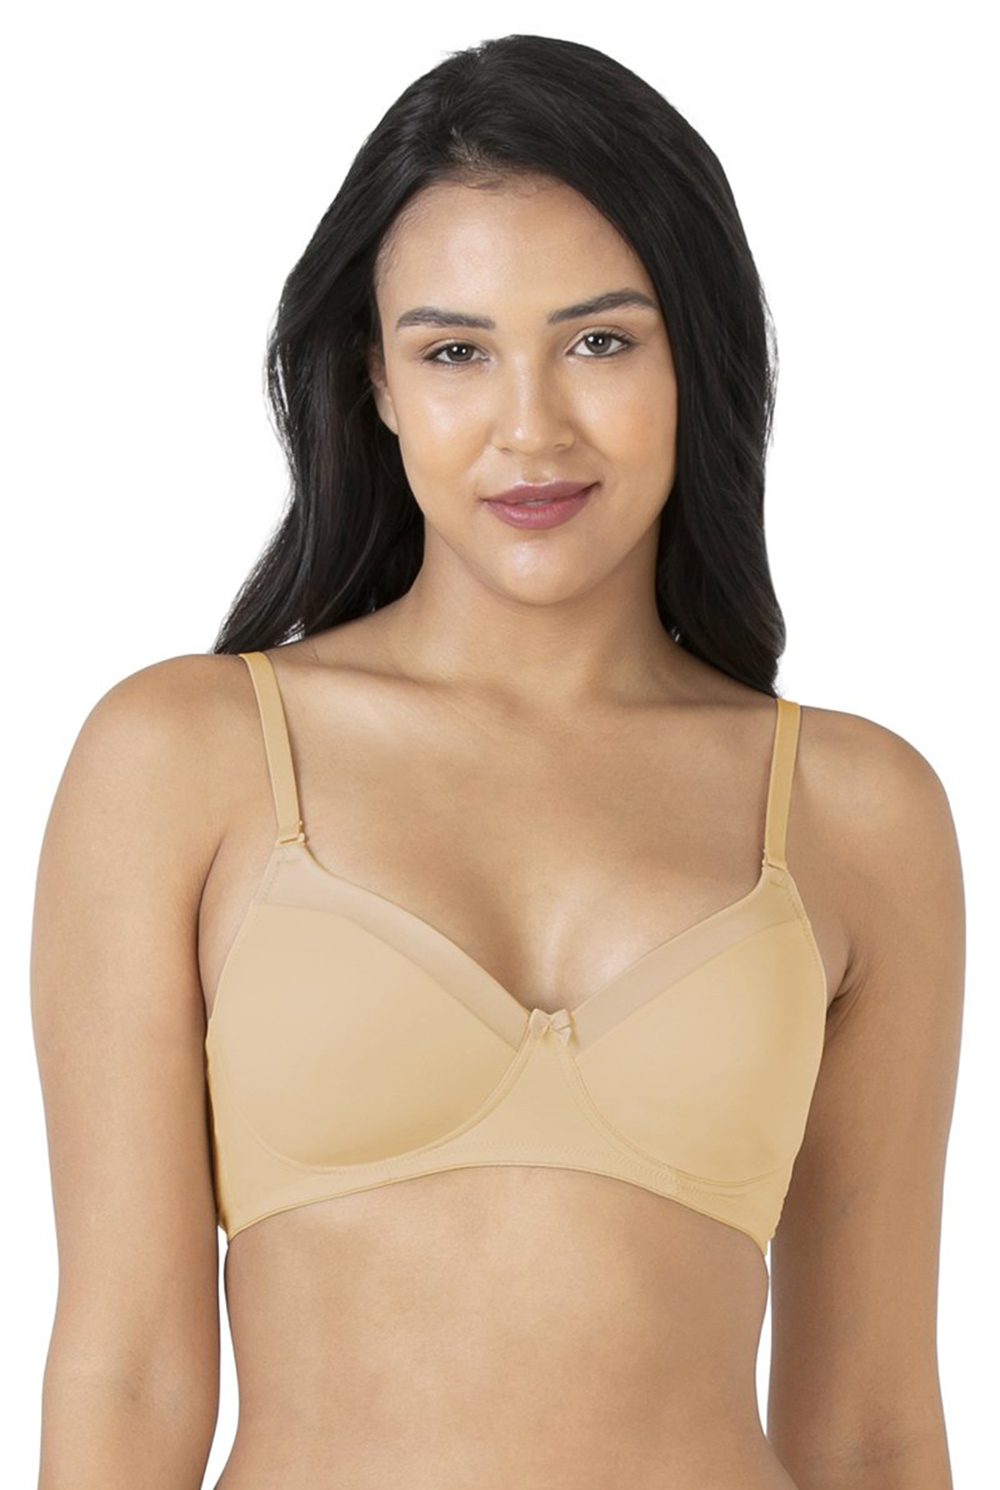 Buy Floret Women's Cotton Padded Wire Free T-Shirt, Molded, Seamless Bra  (3010Nude38_Beige, Nude_38B) at